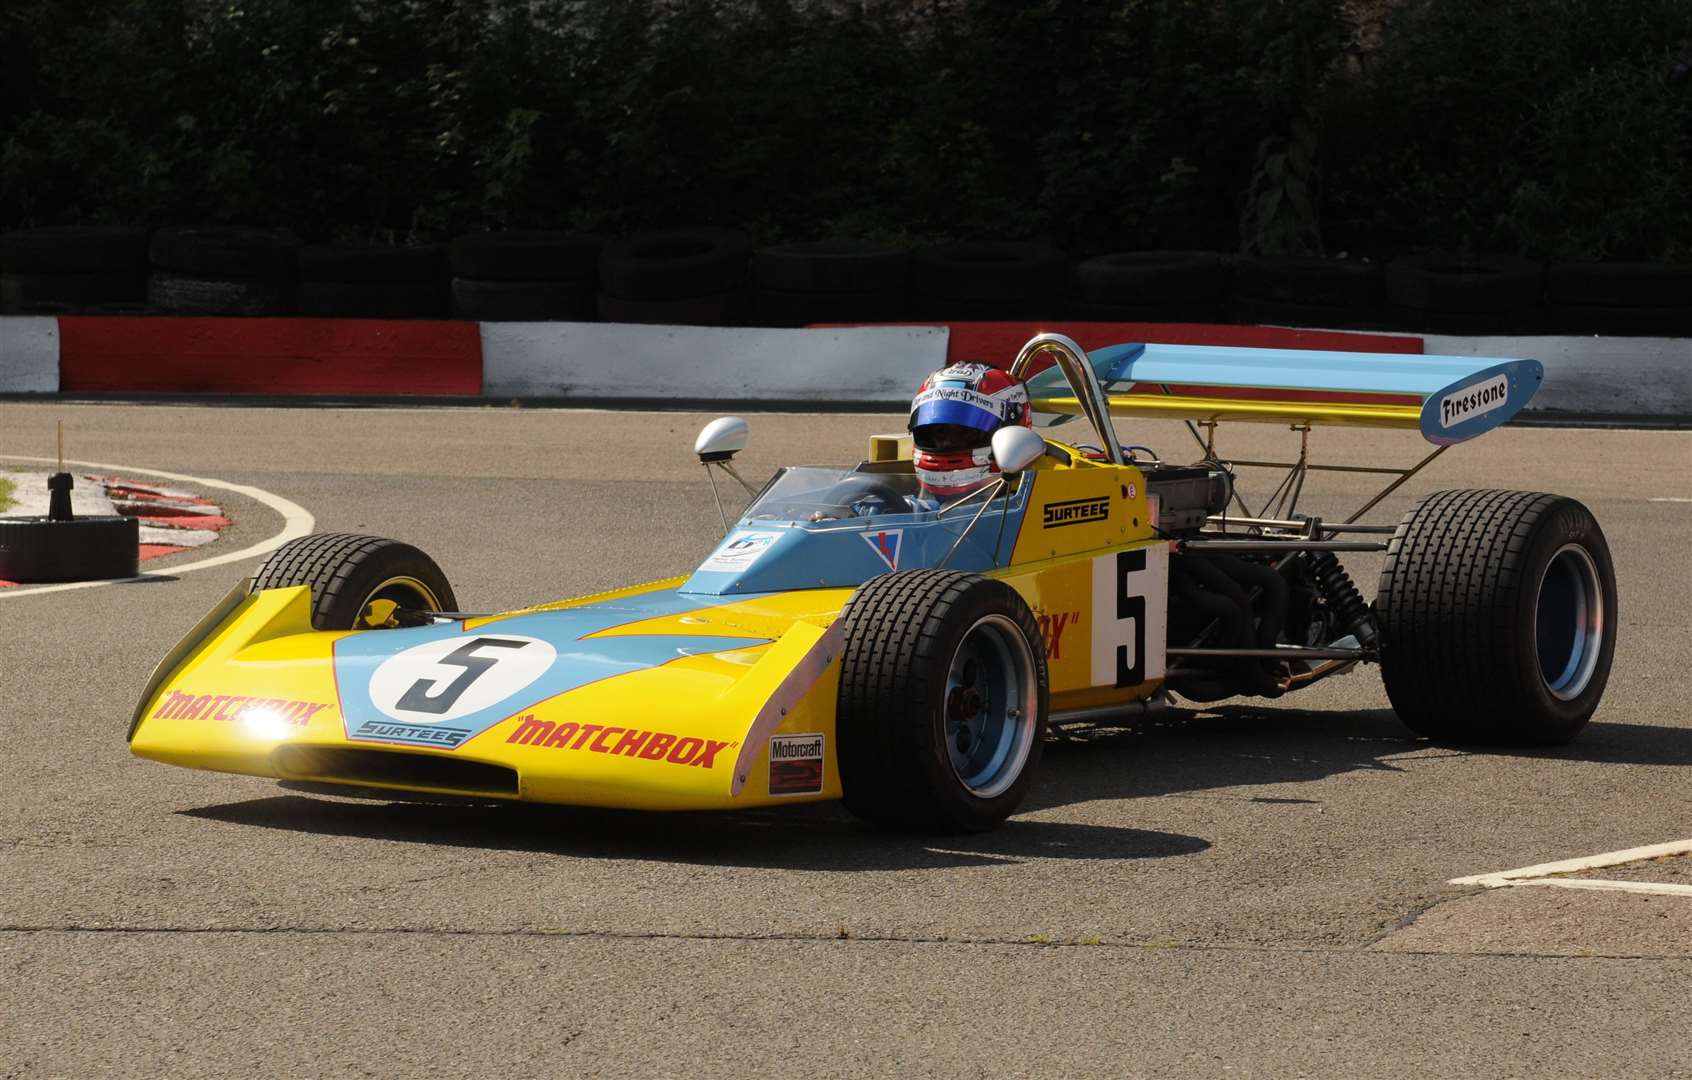 Sportscar and Formula Ford ace Scott Malvern demonstrated a Surtees TS10 Formula Two car in 2015 to mark the official takeover of the circuit by John Surtees. Picture: Steve Crispe